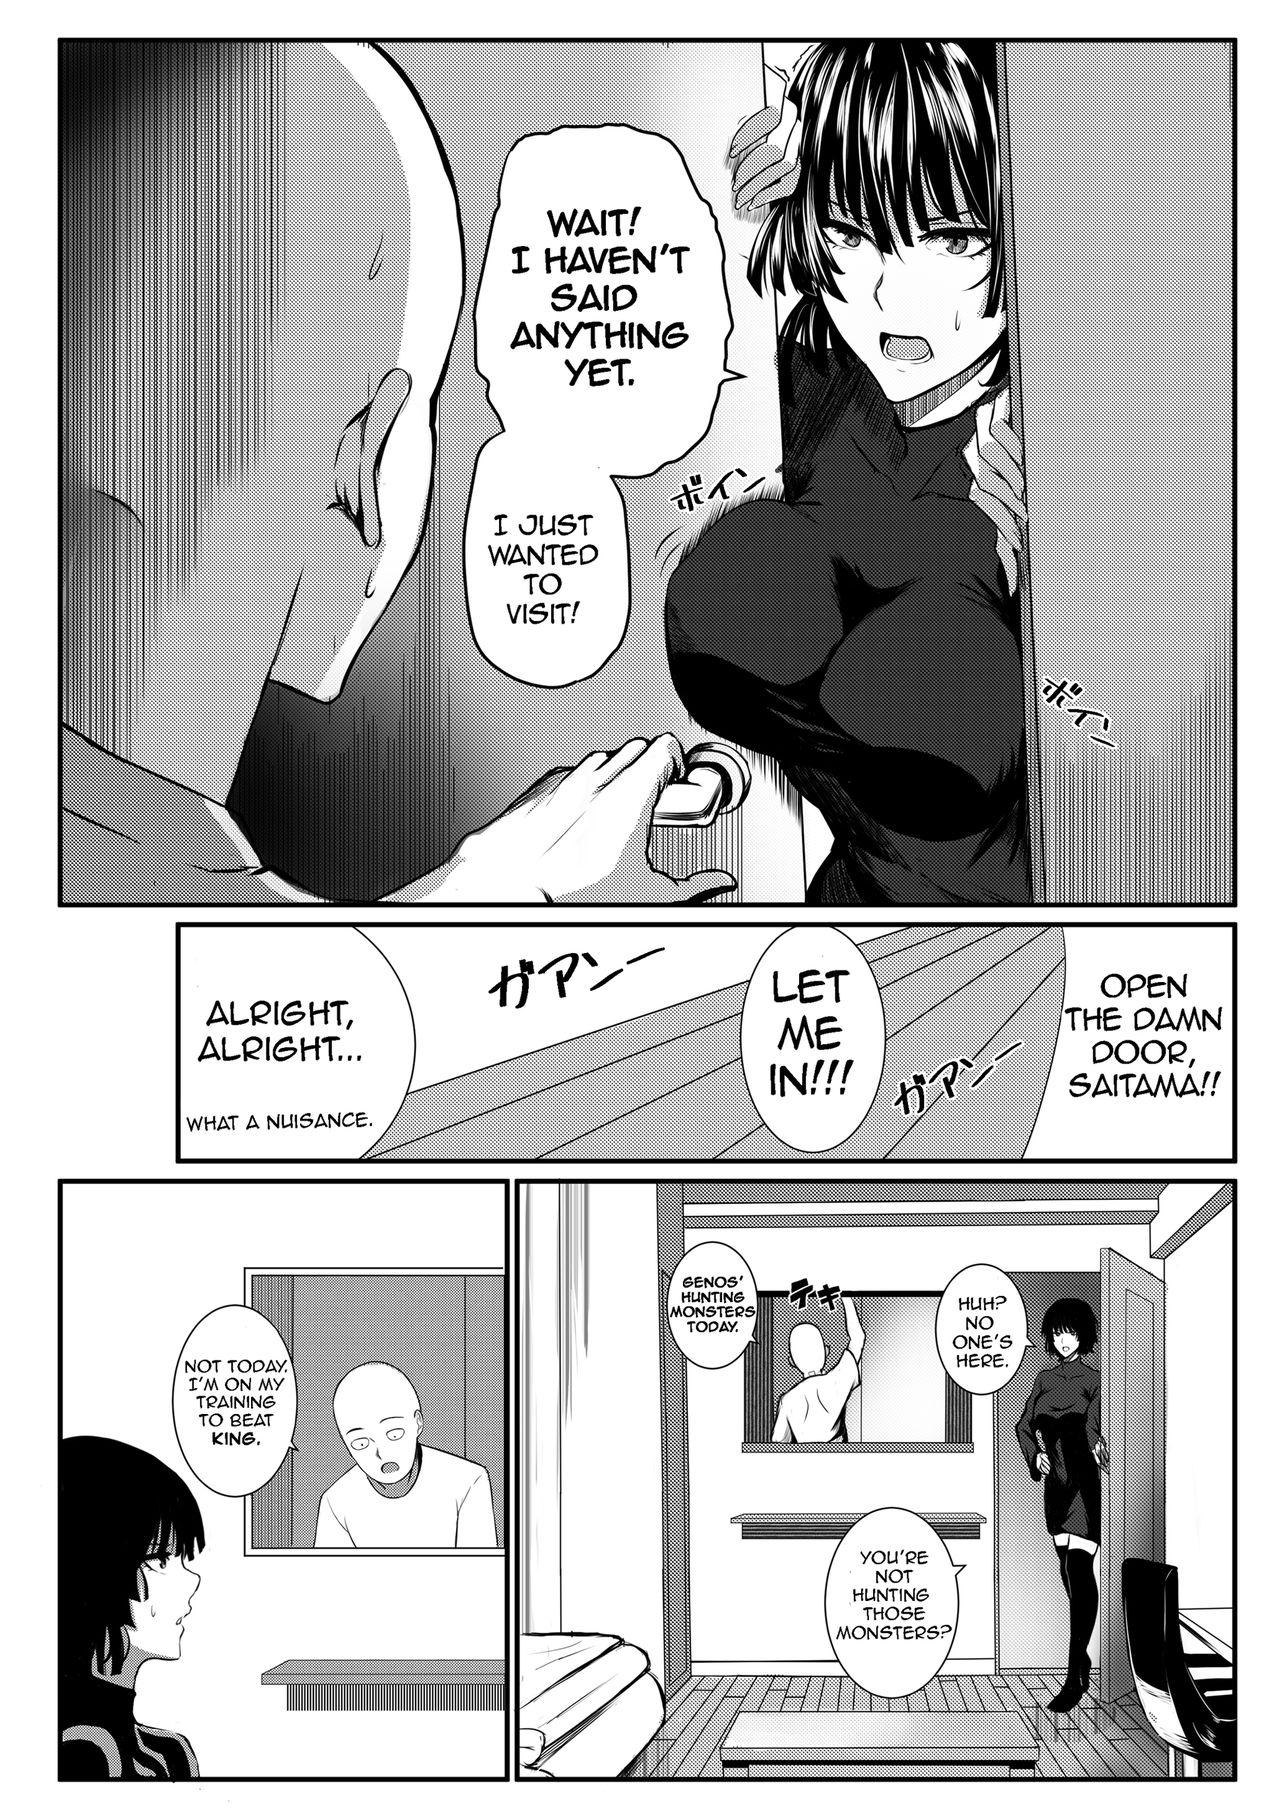 Caliente ONE THRUST-MAN - One punch man Asslicking - Page 4